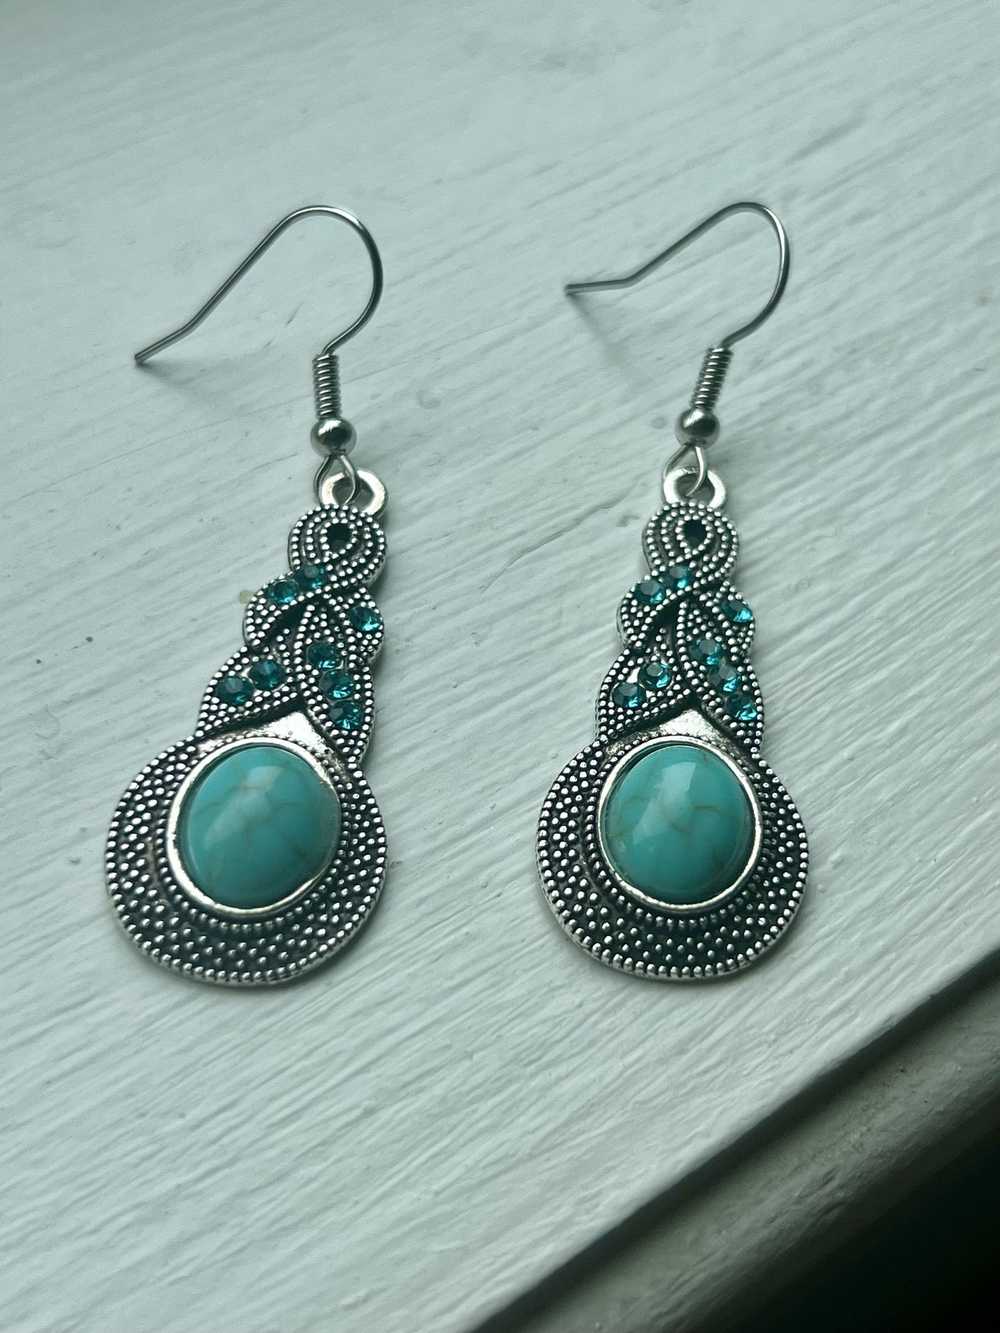 Other Vintage woman's earrings - image 2